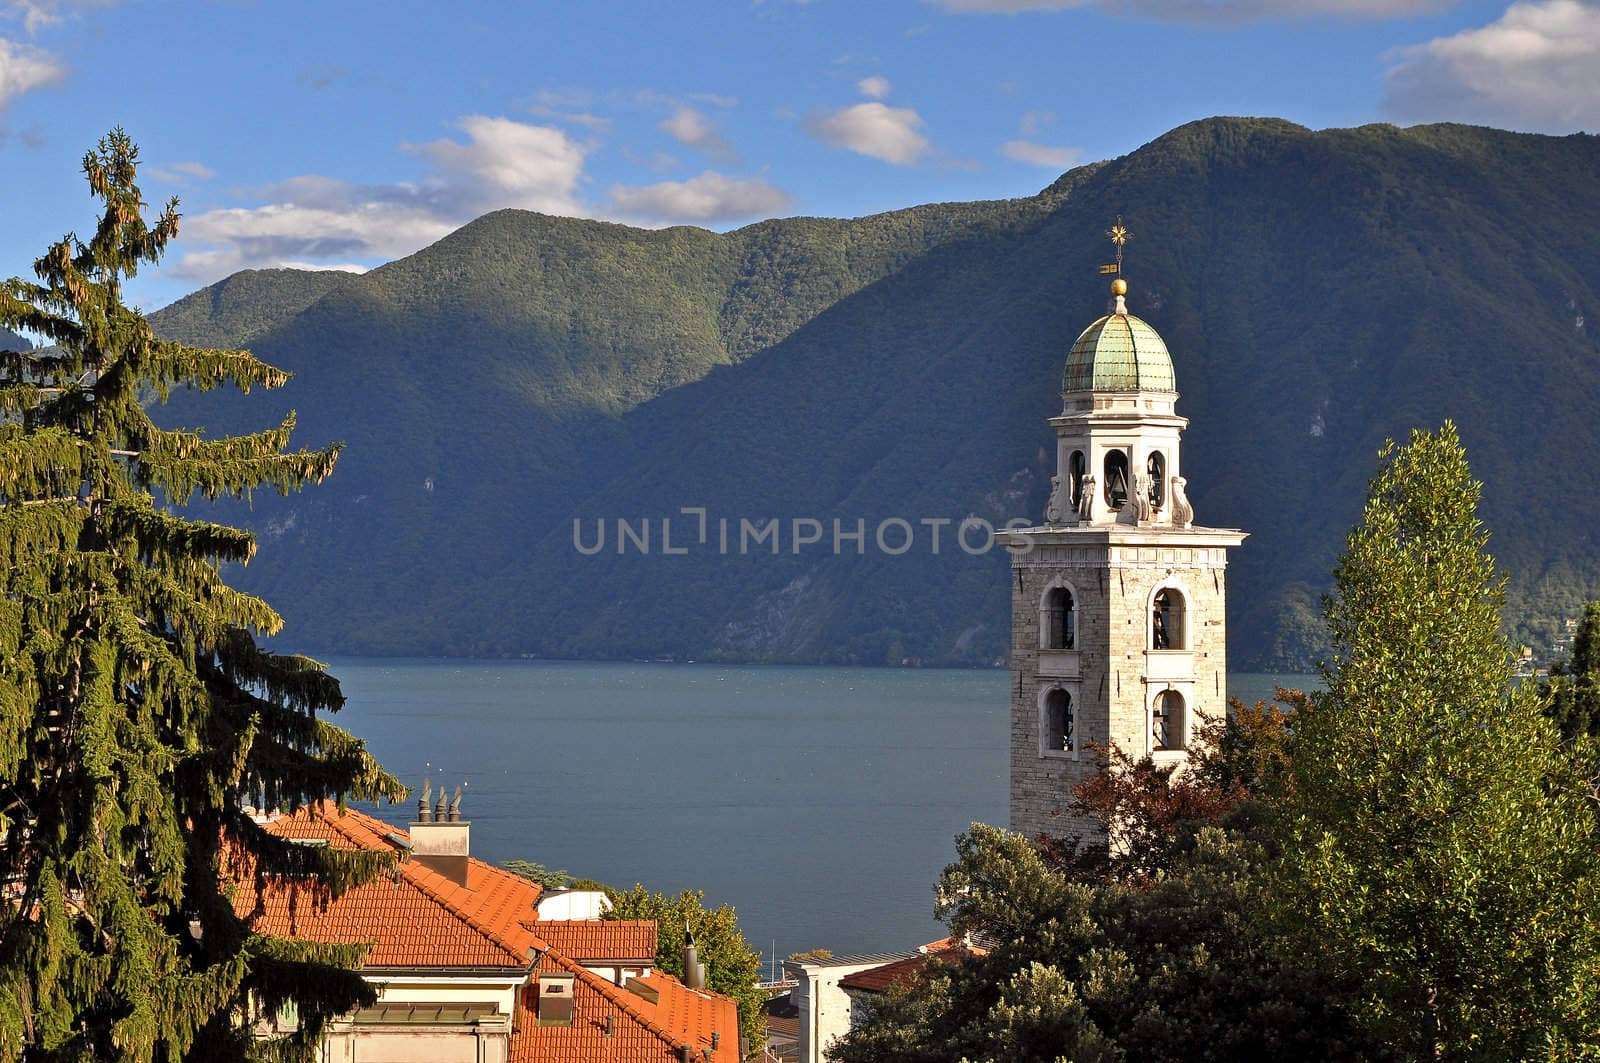 View from Lugano, Switzerland with church tower and lake.